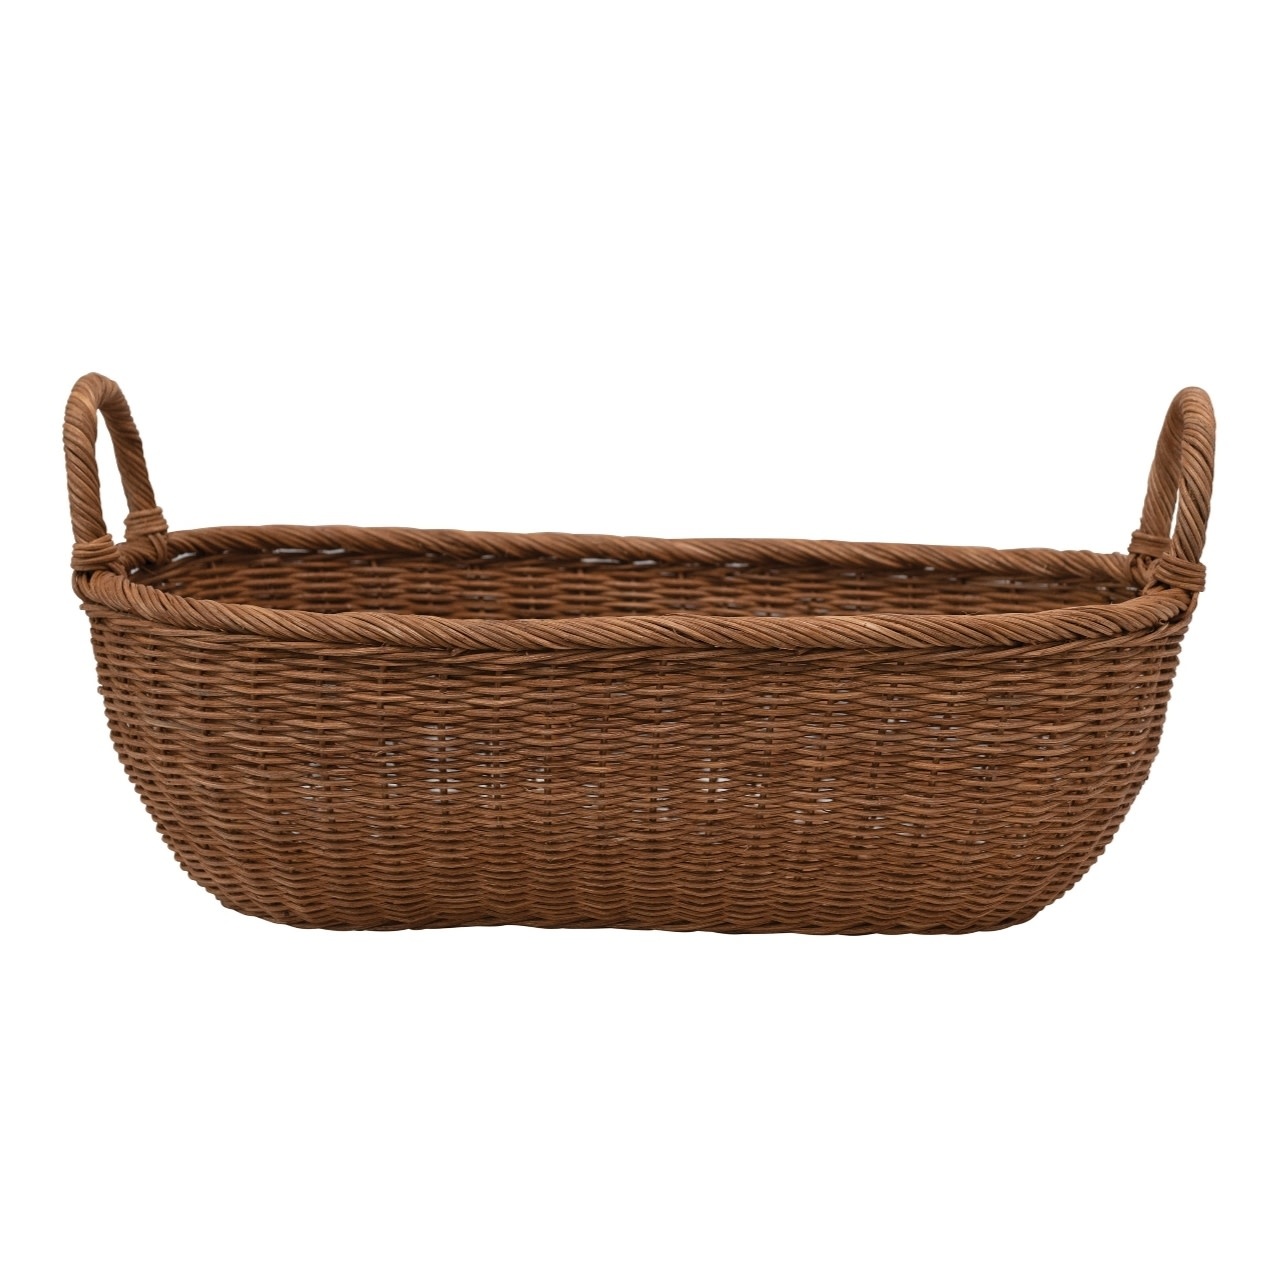 Hand-Woven Wicker Basket w/ Handles, Natural, 24.5"L x 13.5"W x 11.5"H, Available for local pick up